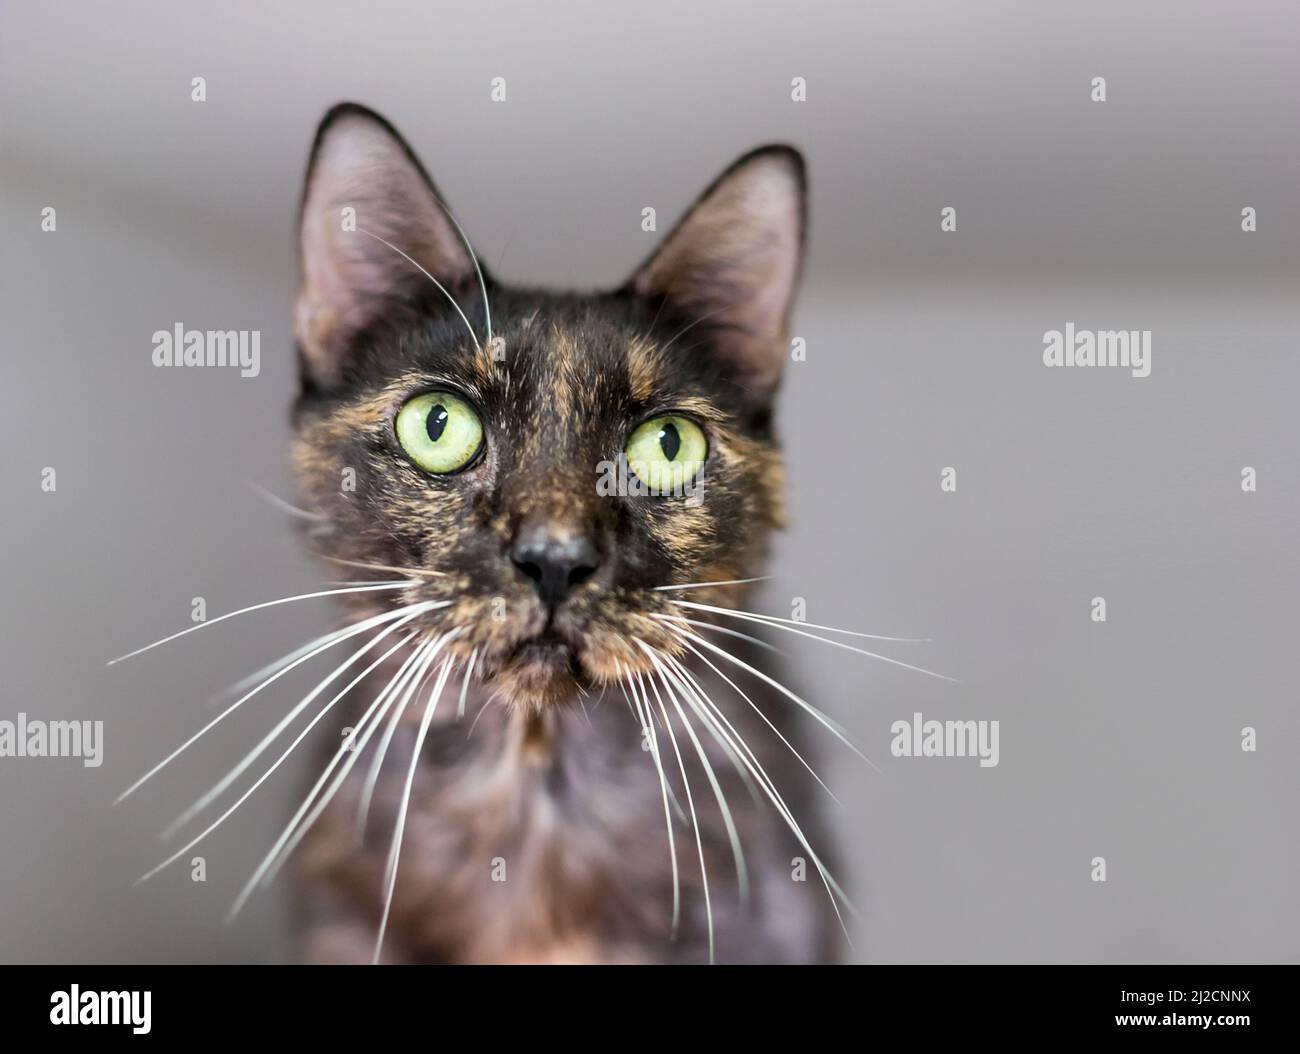 A Tortoiseshell shorthair cat with green eyes and long whiskers Stock Photo